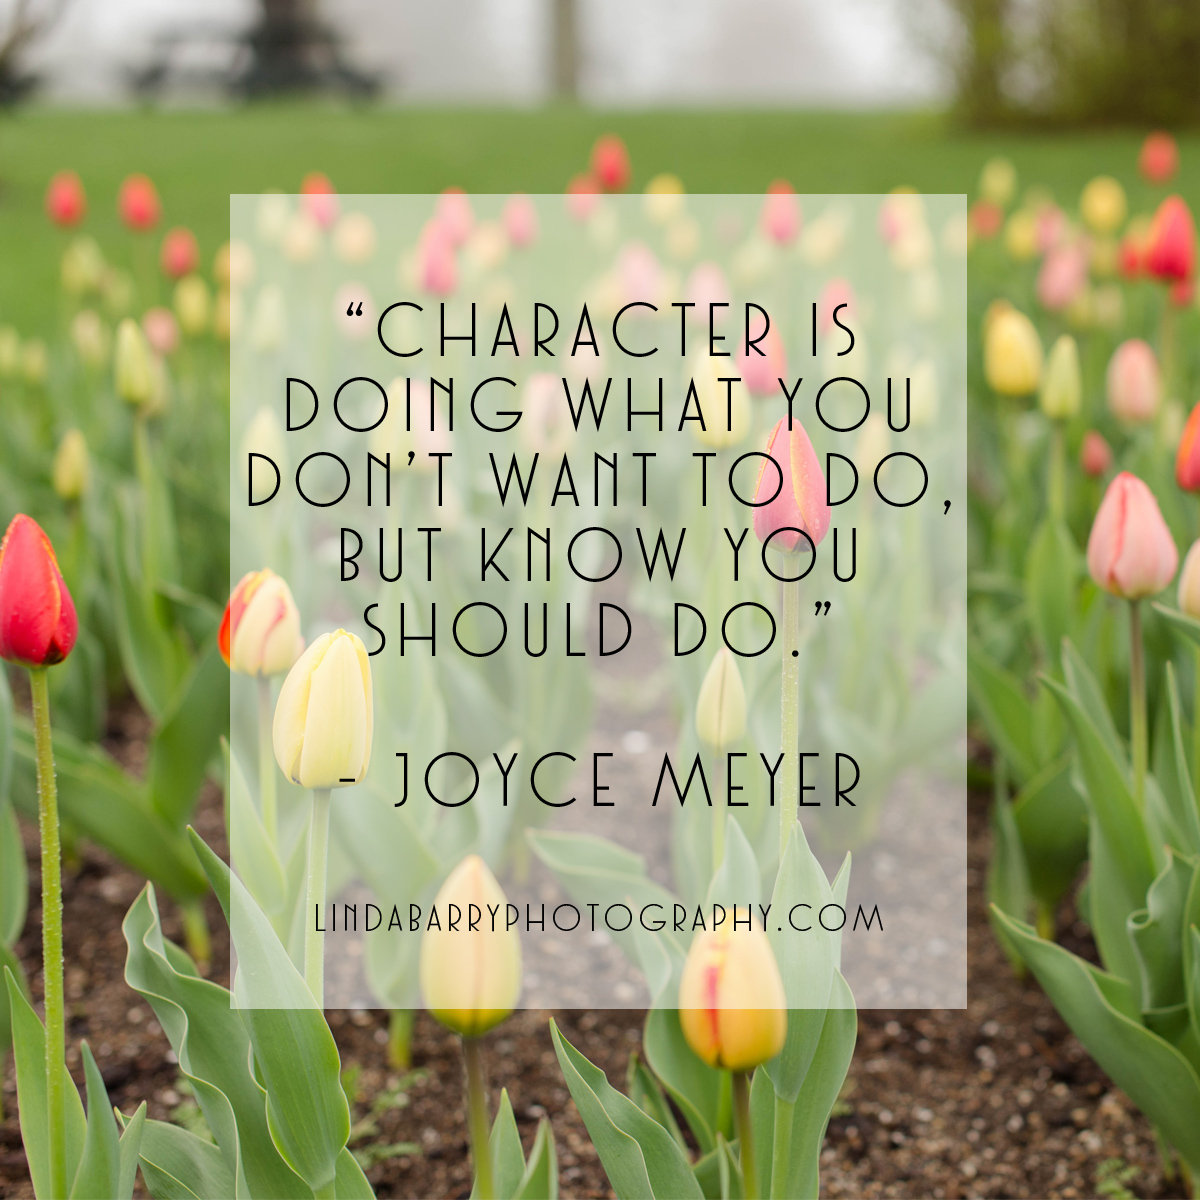 Character is doing what you don't want to do, but know you should do. Inspirational quote by Joyce Meyer.